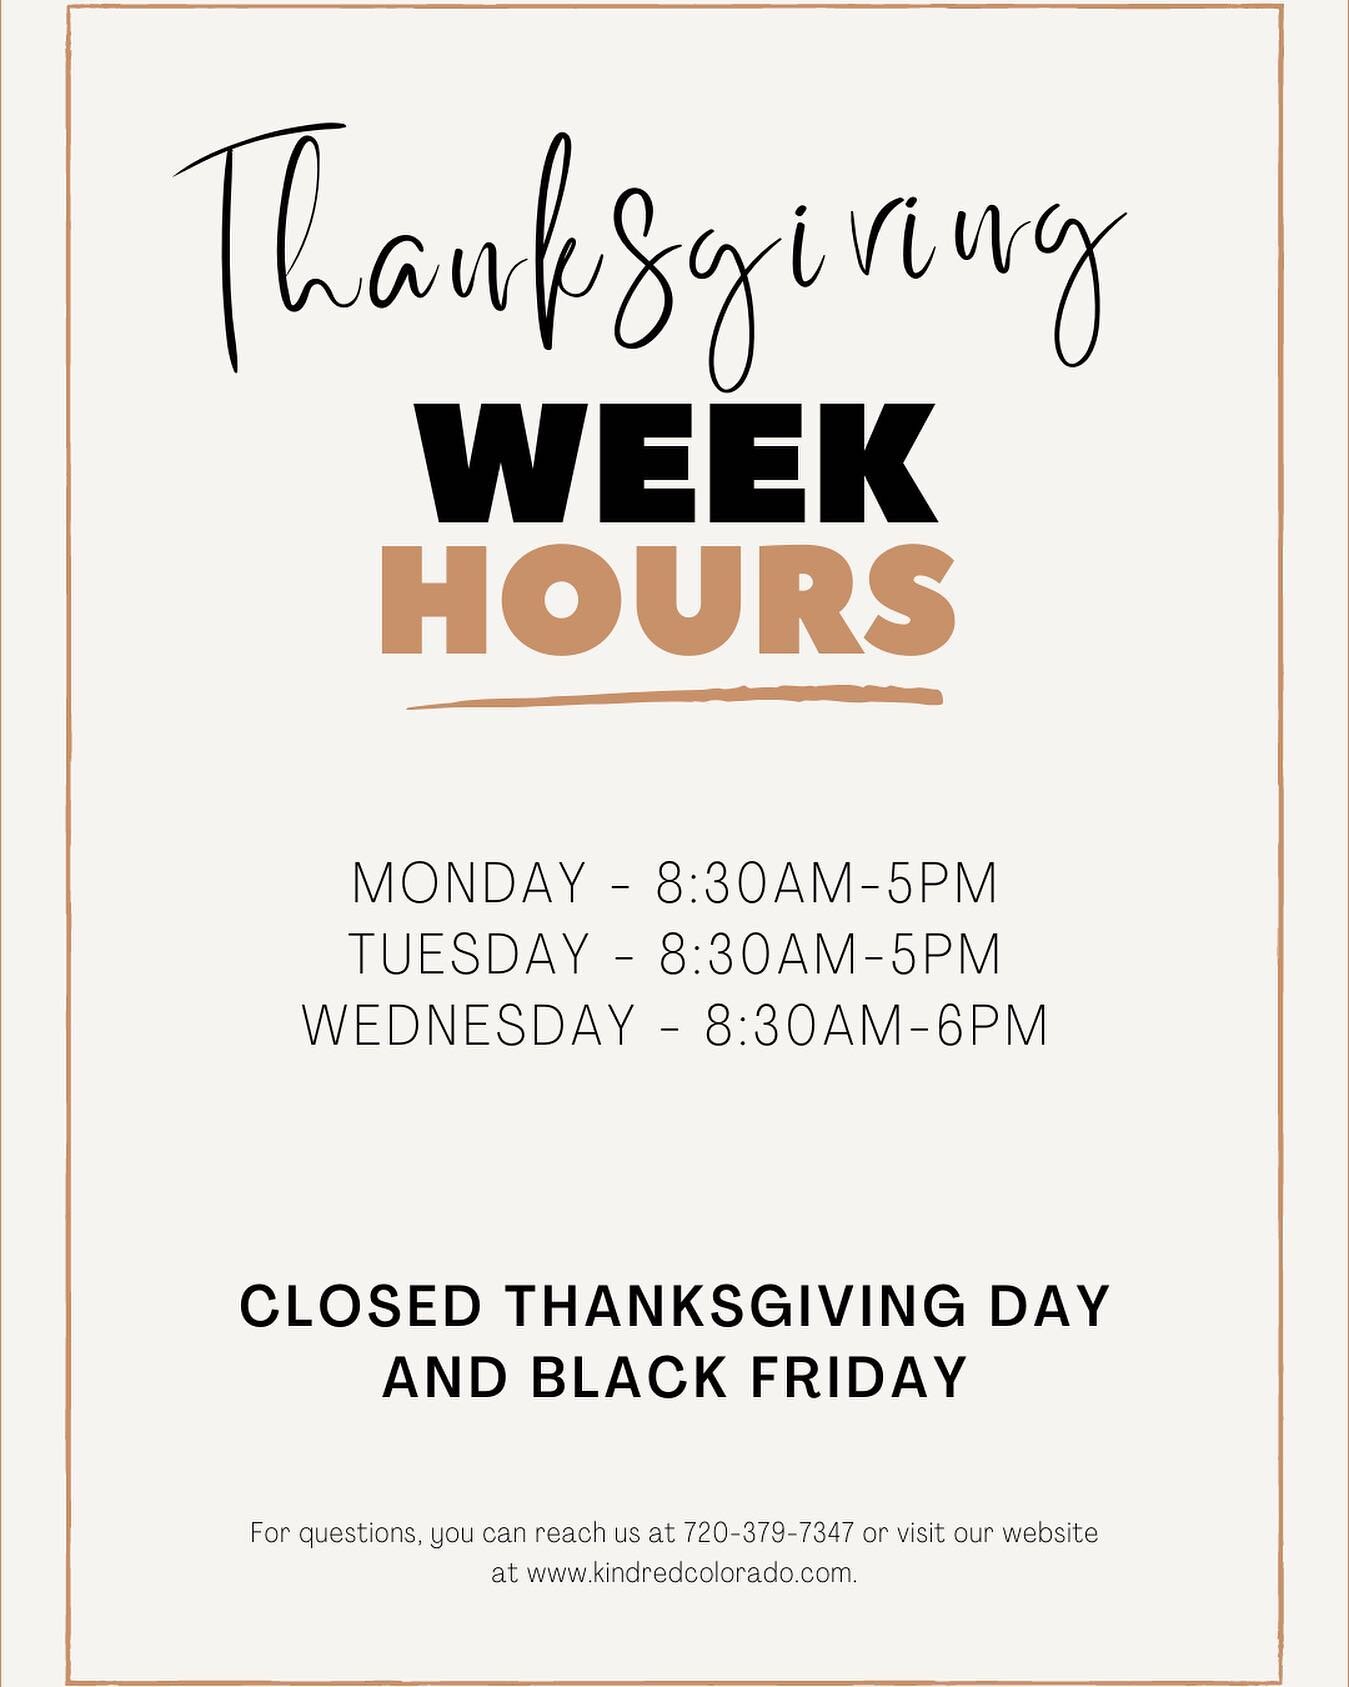 Hey all! Quick reminder that we have some different hours next week because of Thanksgiving. We still have some availability so hurry up and book if you want to get in before the holiday!